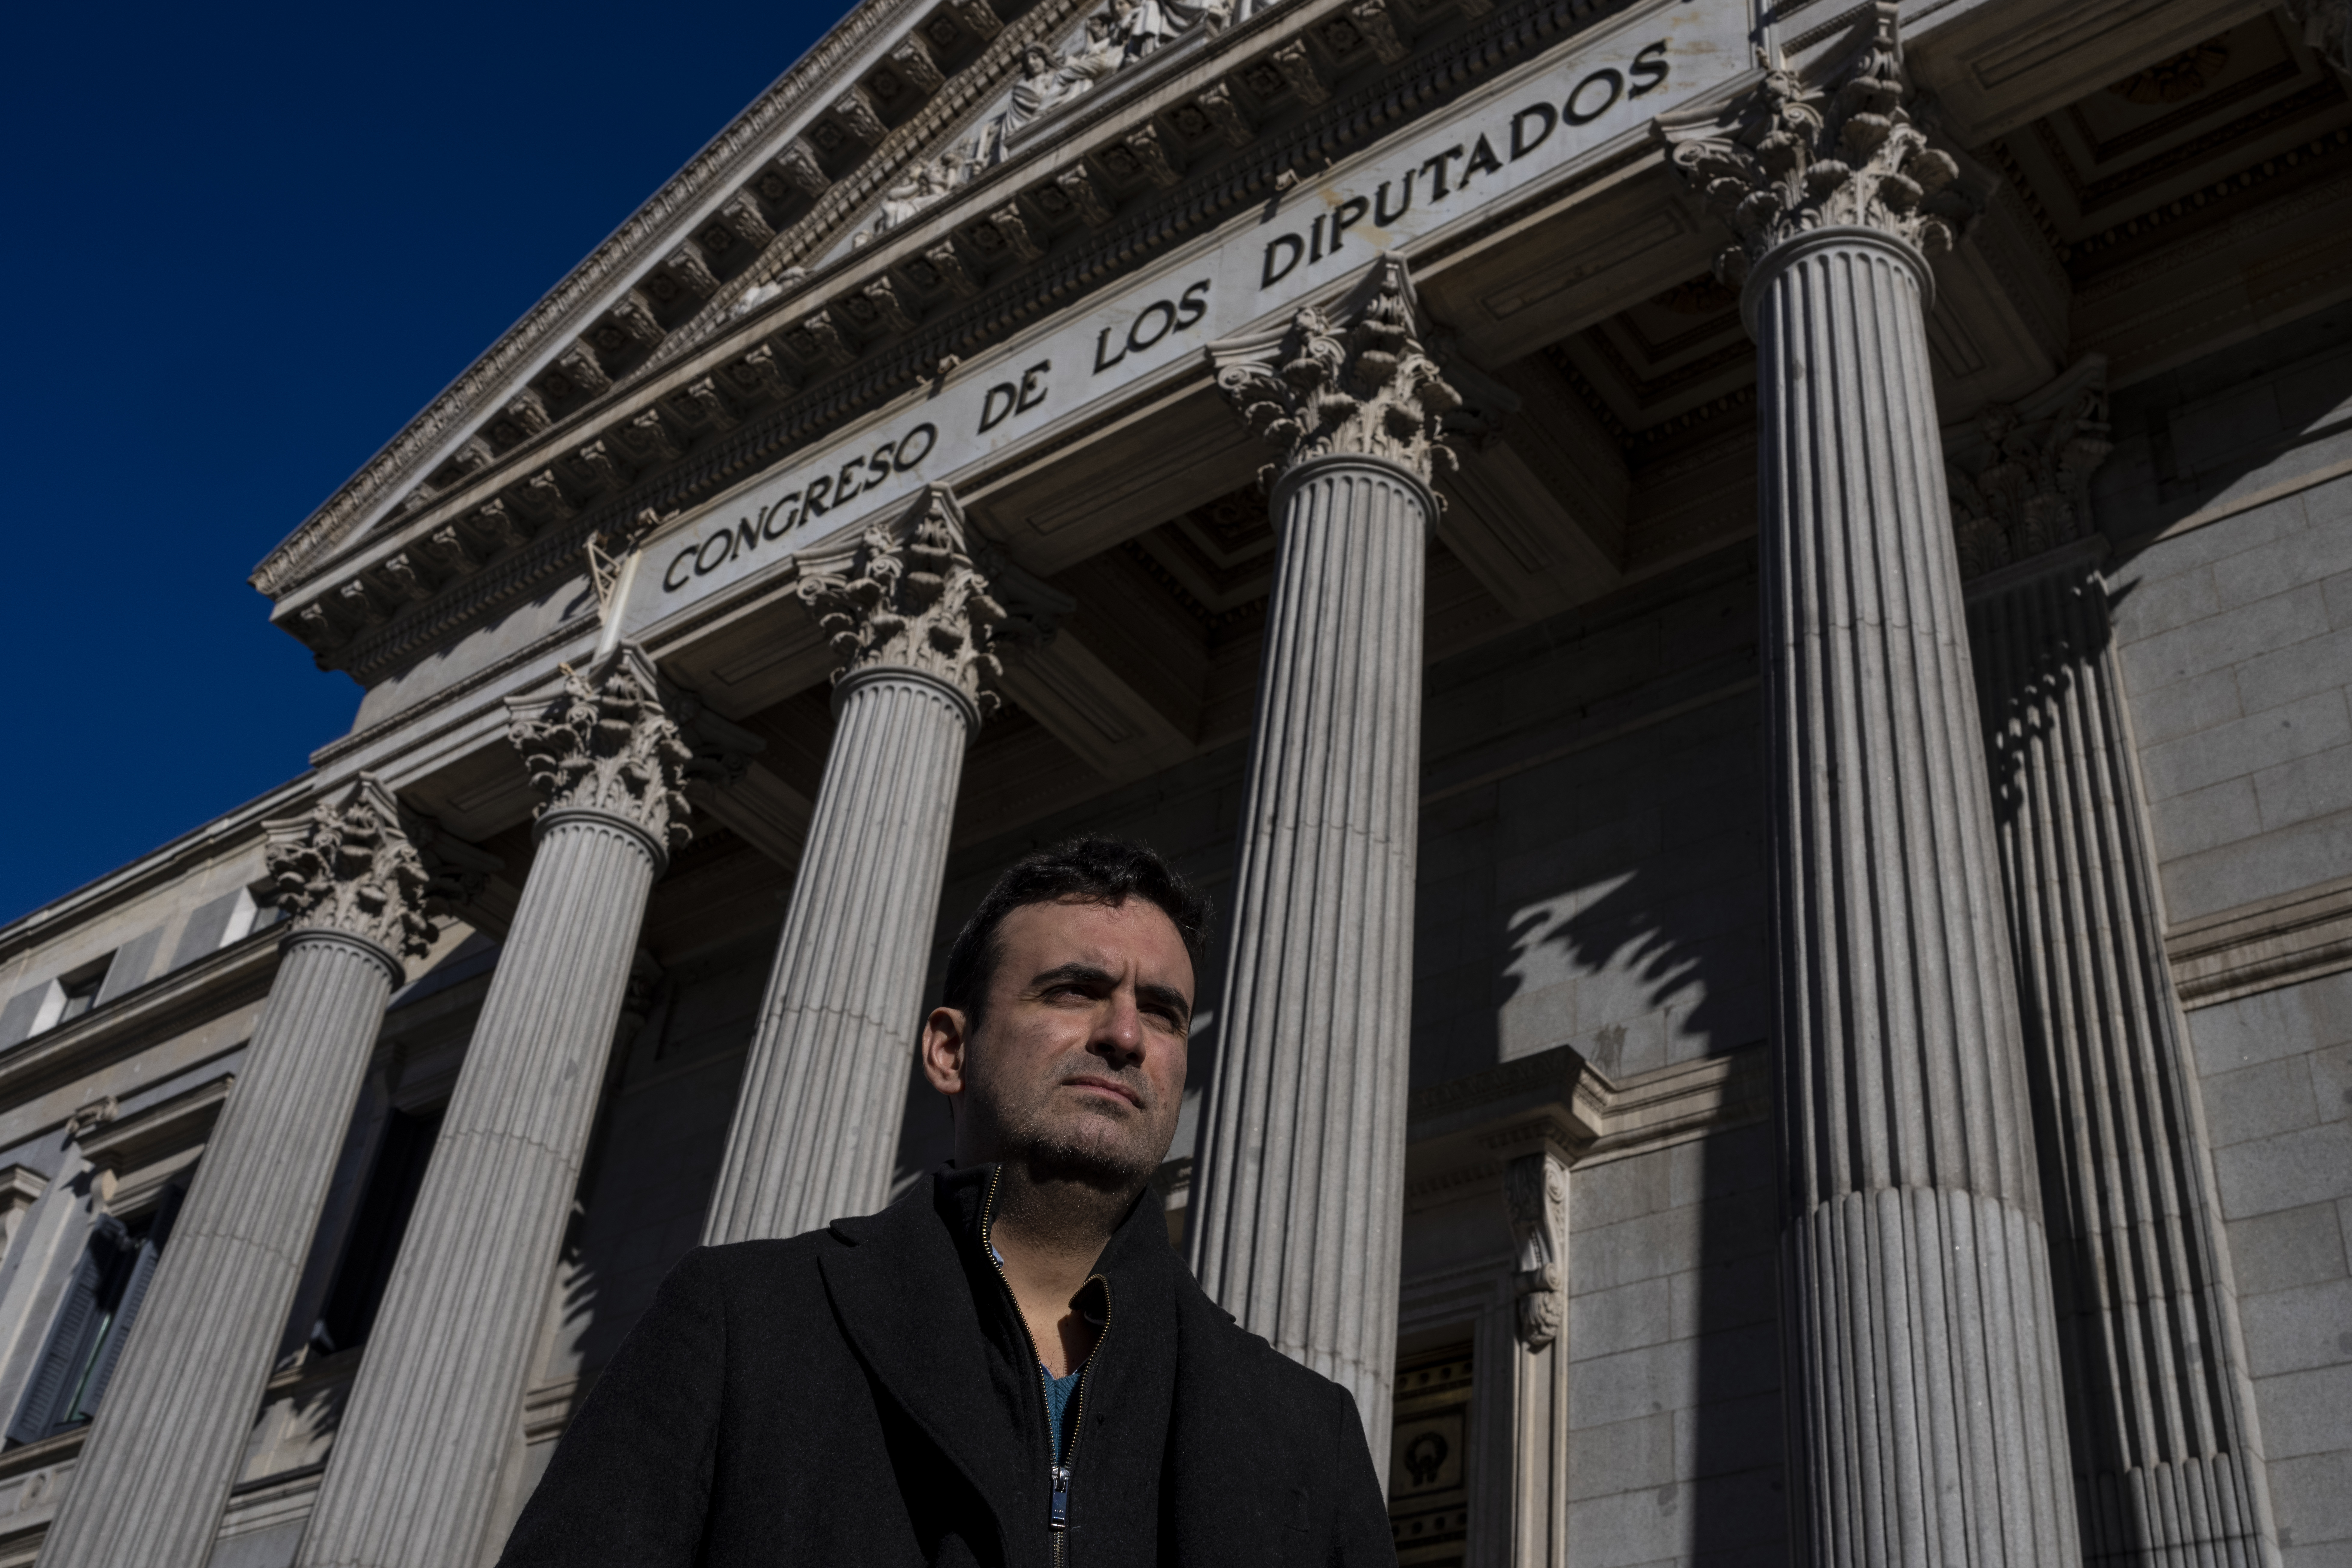 Miguel Hurtado, who has campaigned against impunity since disclosing his own account of being abused at a monastery in northeastern Spain, poses for a picture in front of a Spanish parliament in Madrid, Spain, Tuesday, Feb. 1, 2022. (AP Photo/Manu Fernand